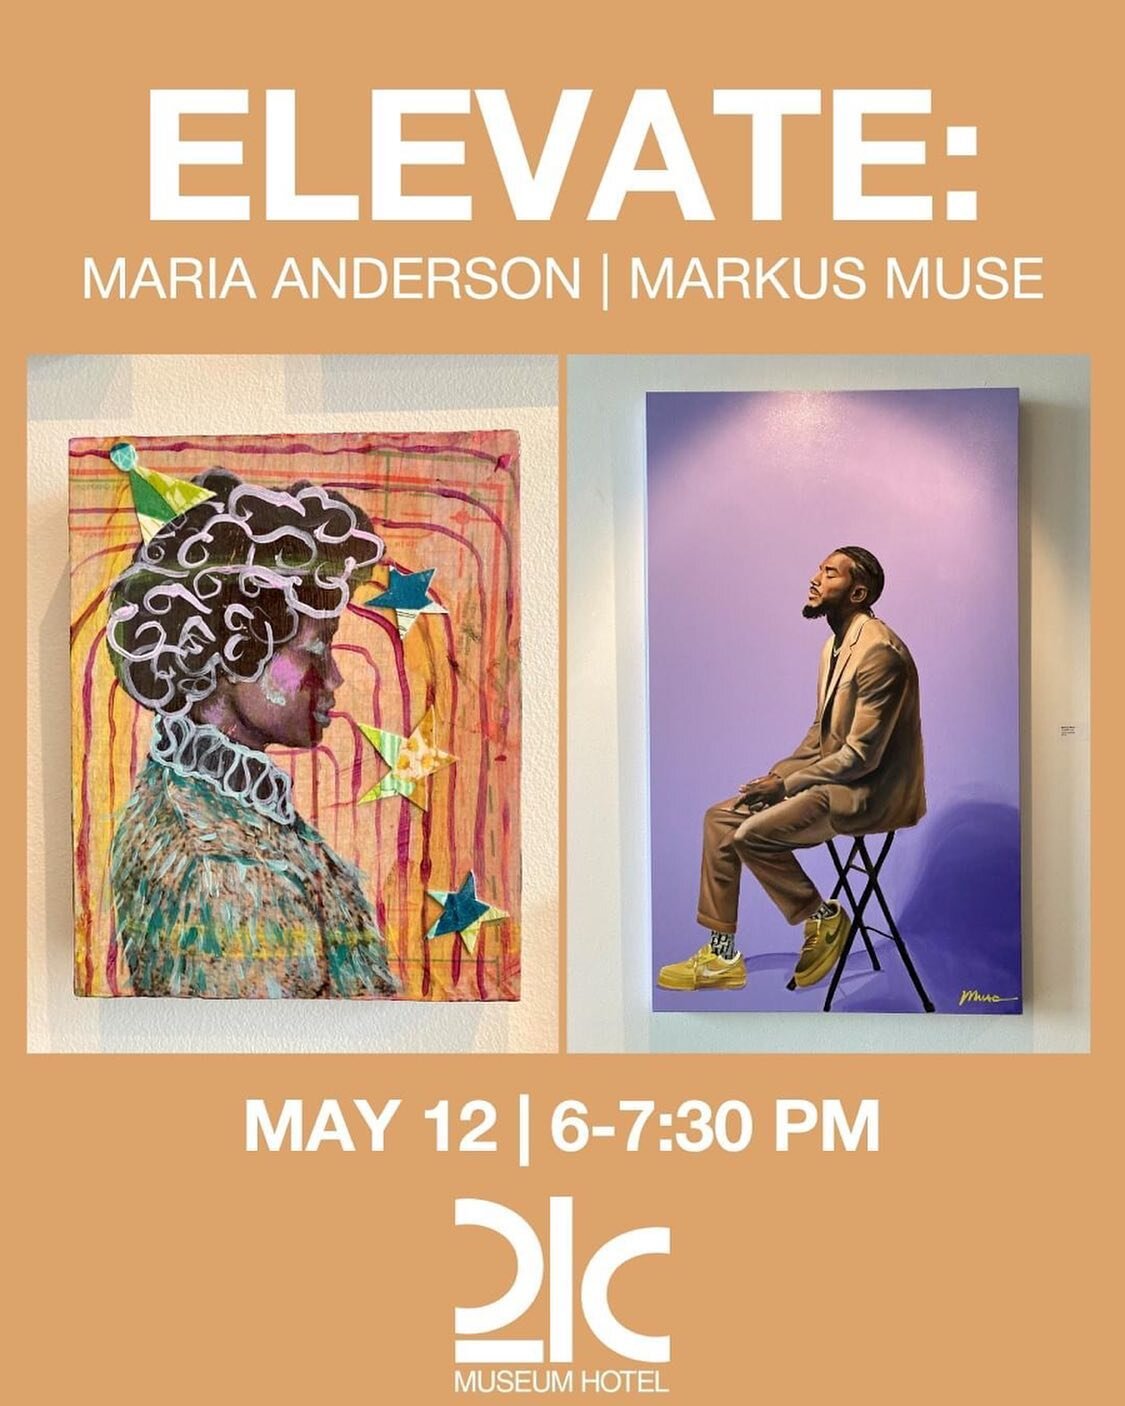 Tonight! Come party hardy with me and @museart_official  @21coklahomacity !

#elevateat21c #21cmuseumhotel